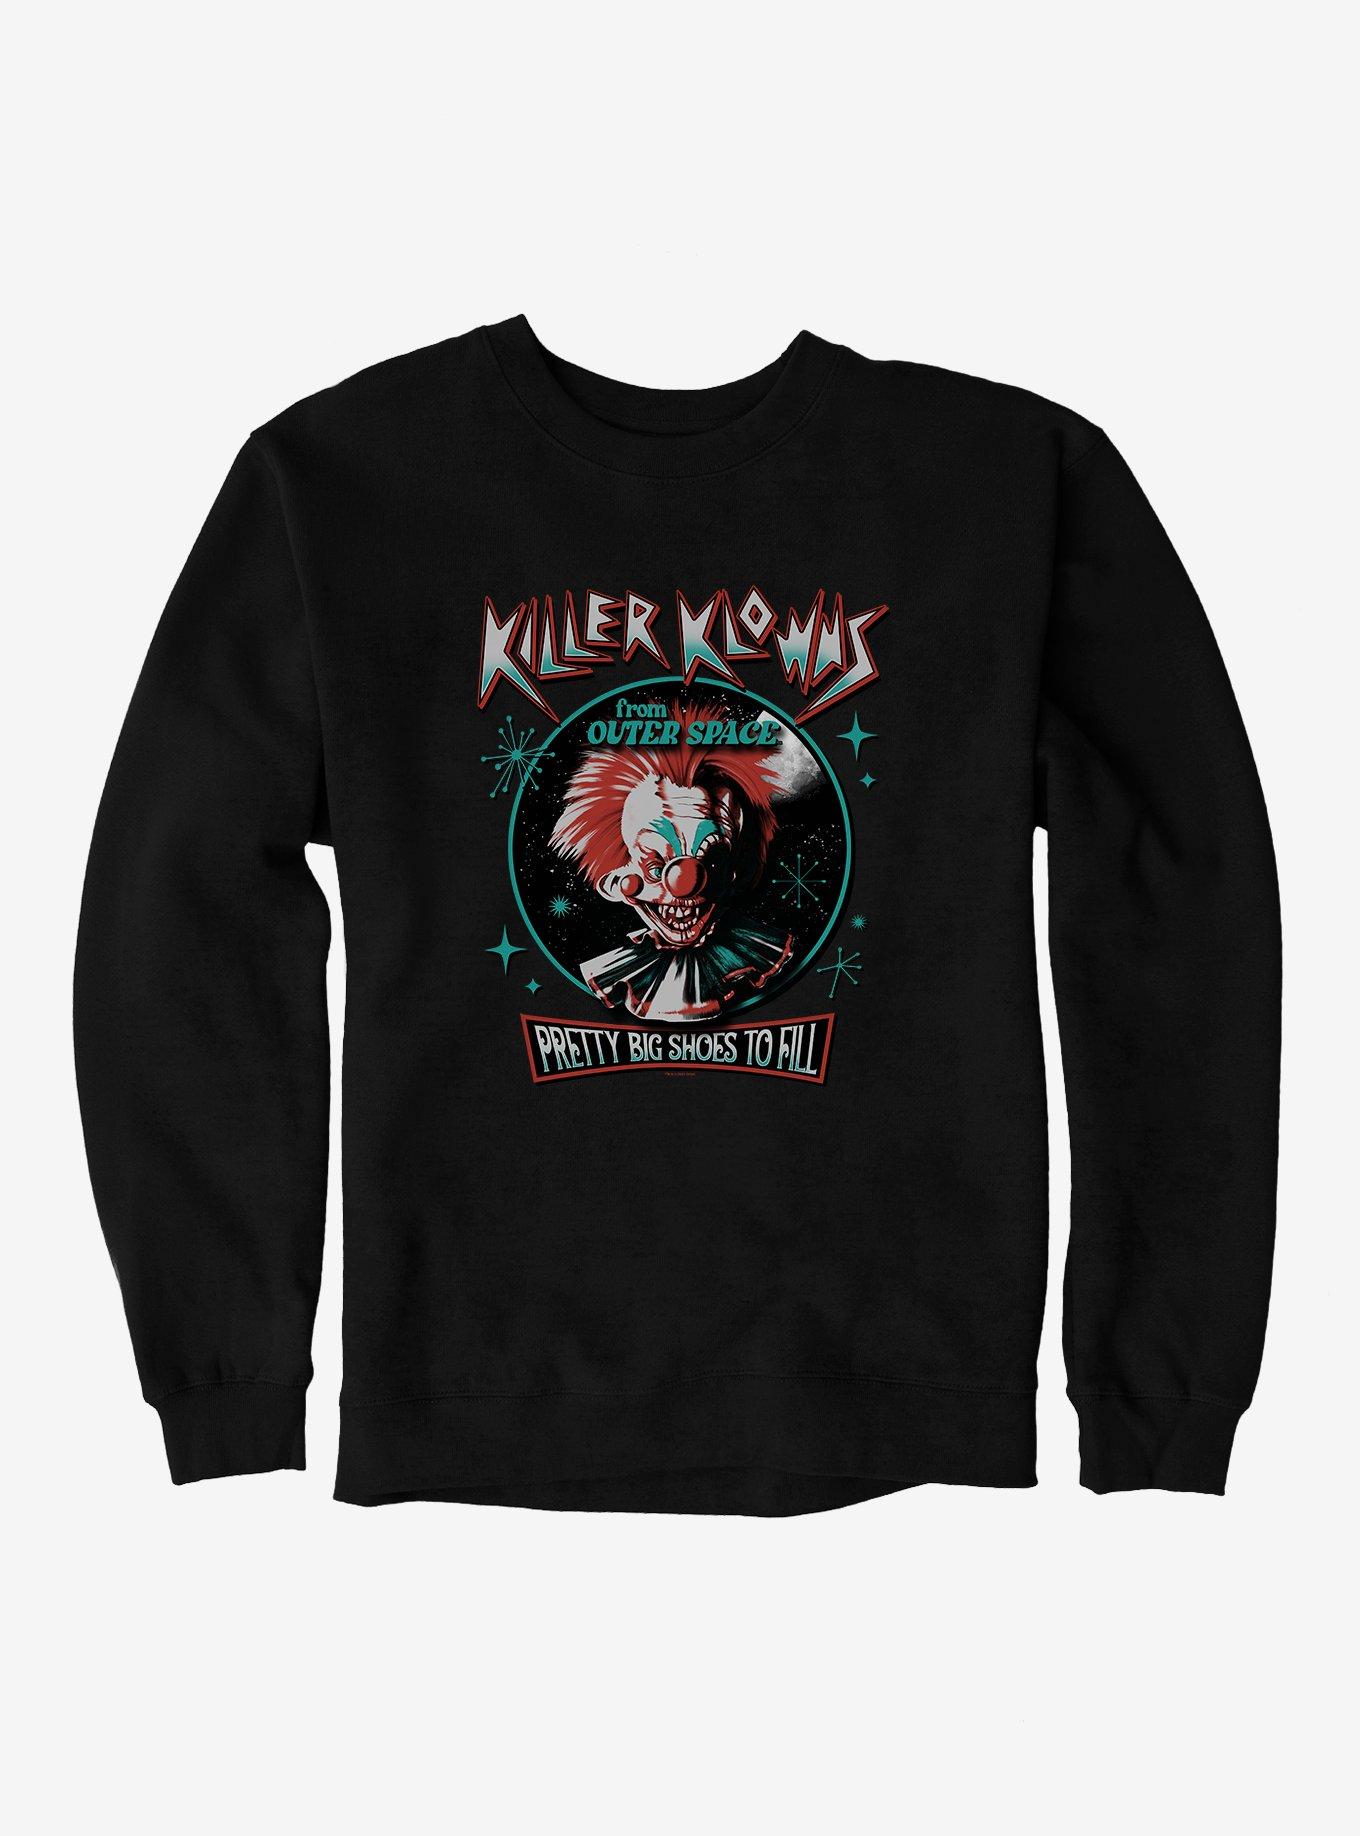 Killer Klowns From Outer Space Pretty Big Shoes To Fill Sweatshirt, BLACK, hi-res